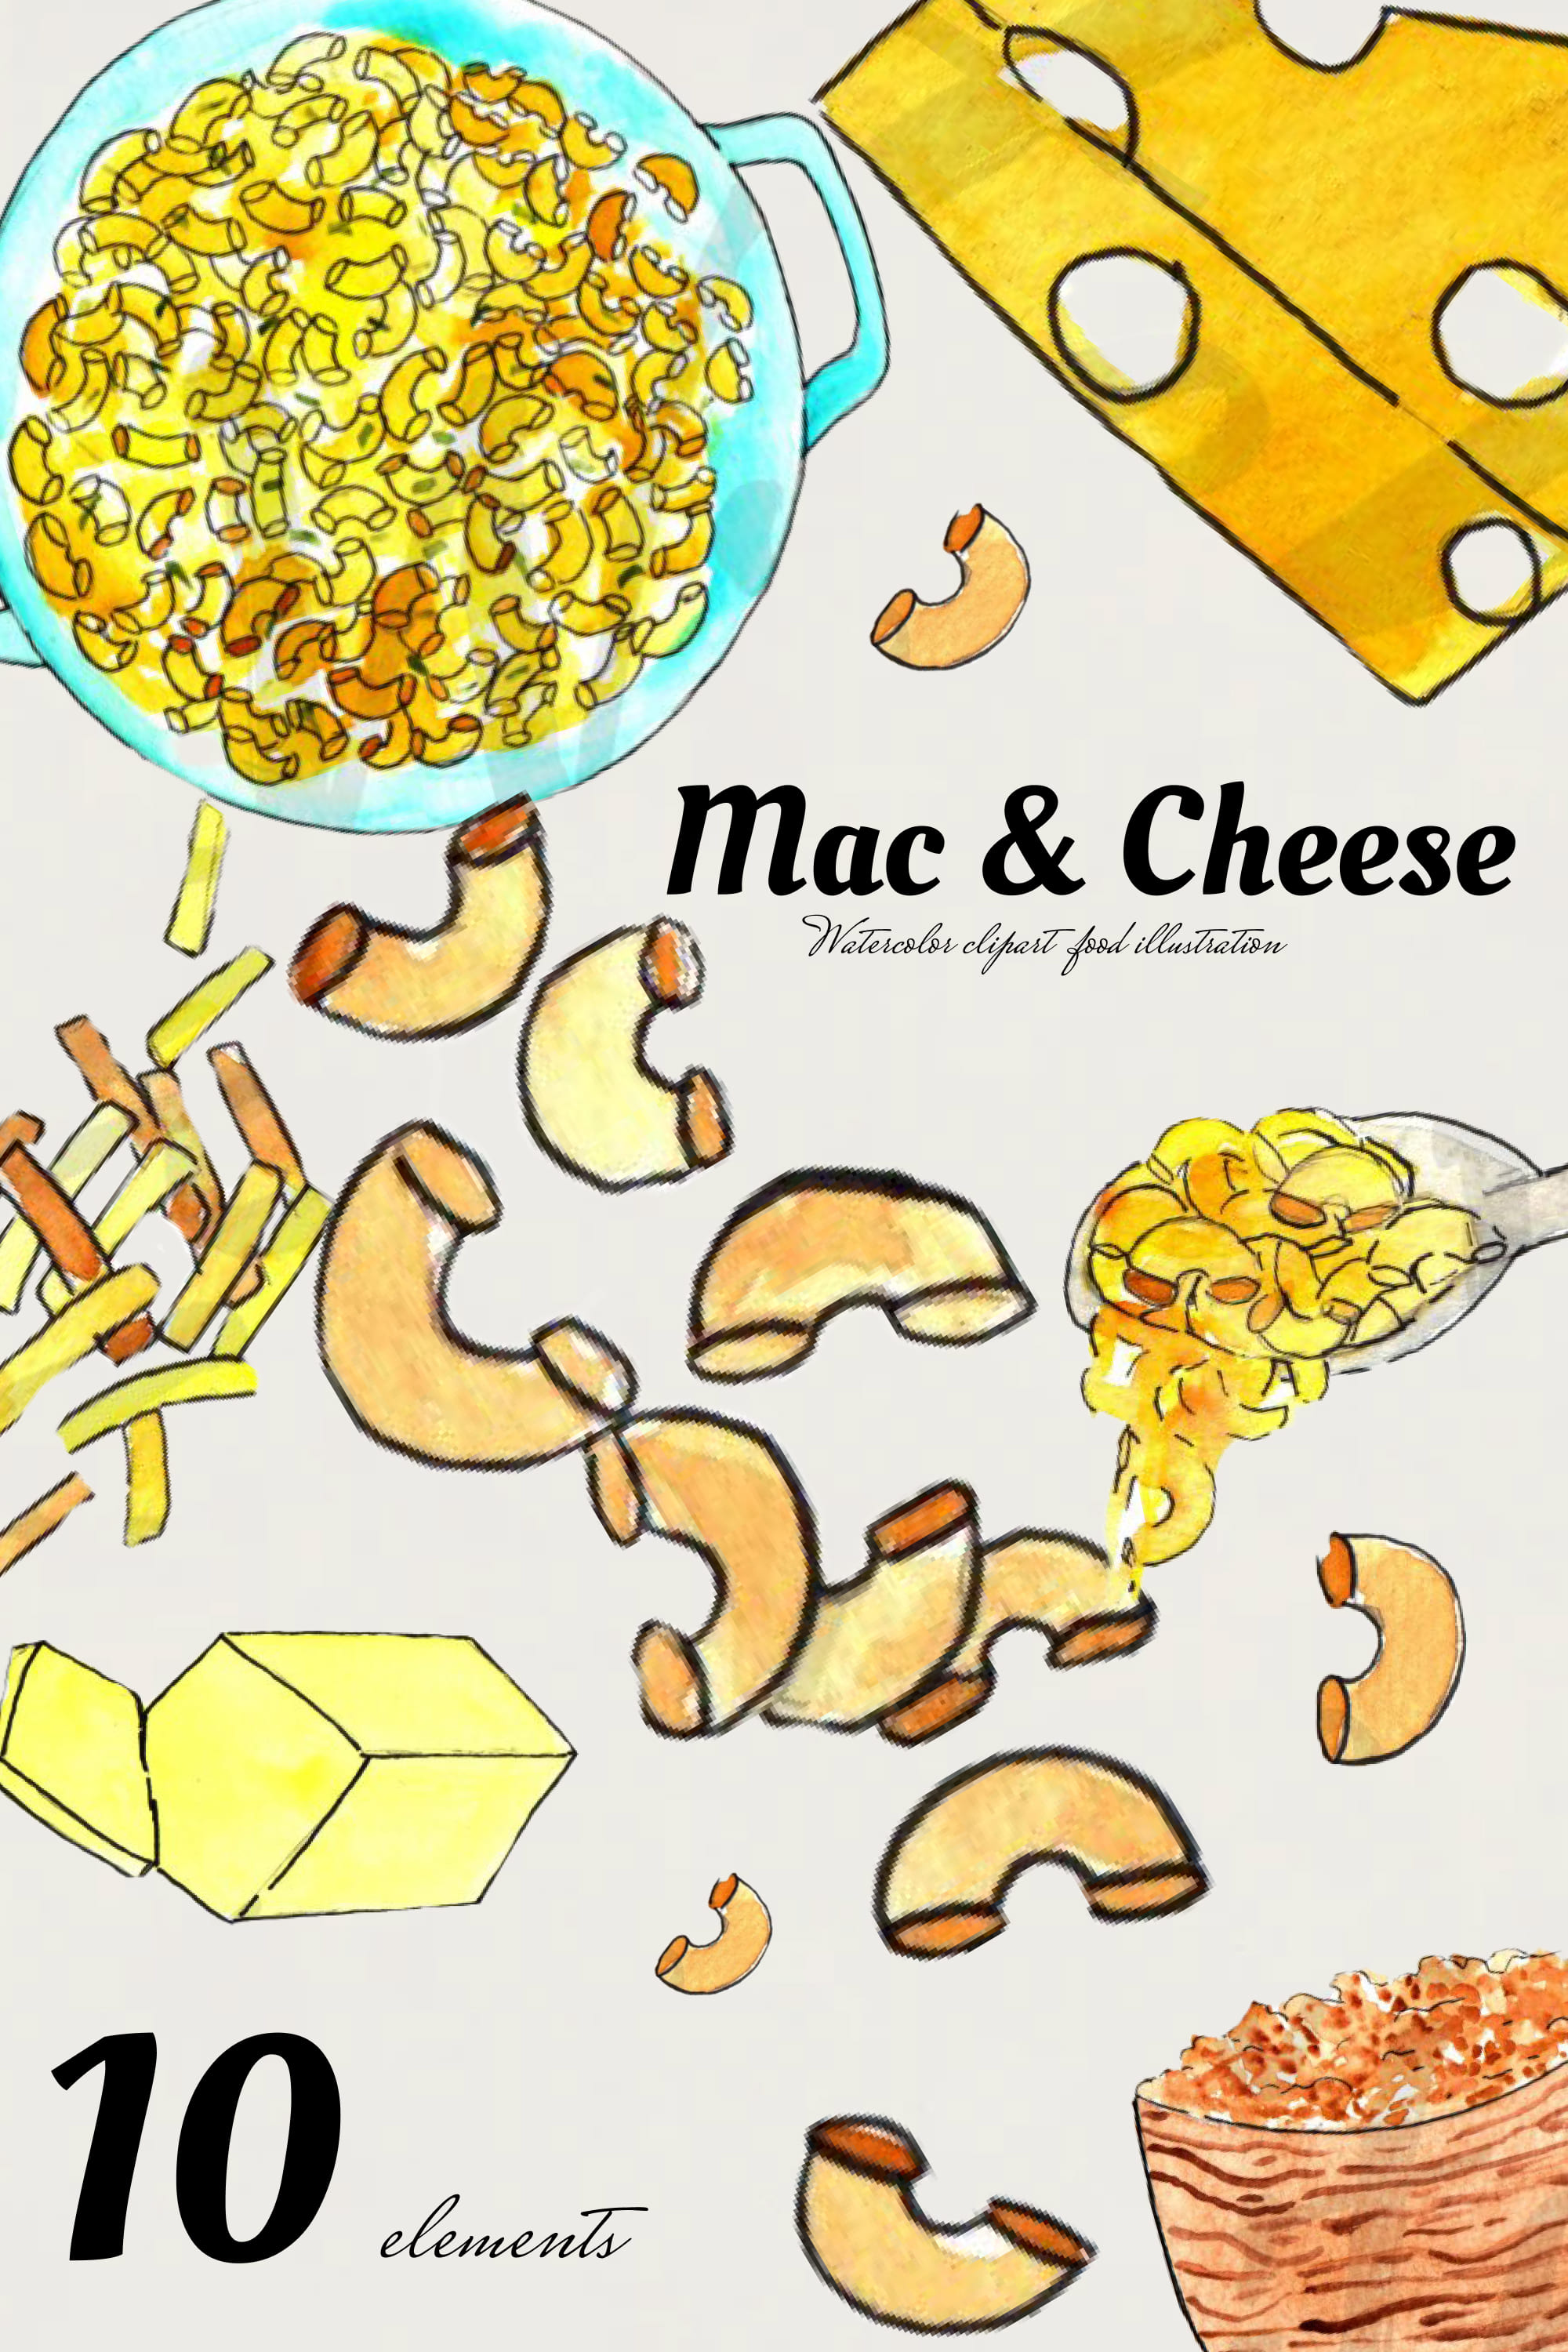 Collection of lovely images of hard cheese and pasta.